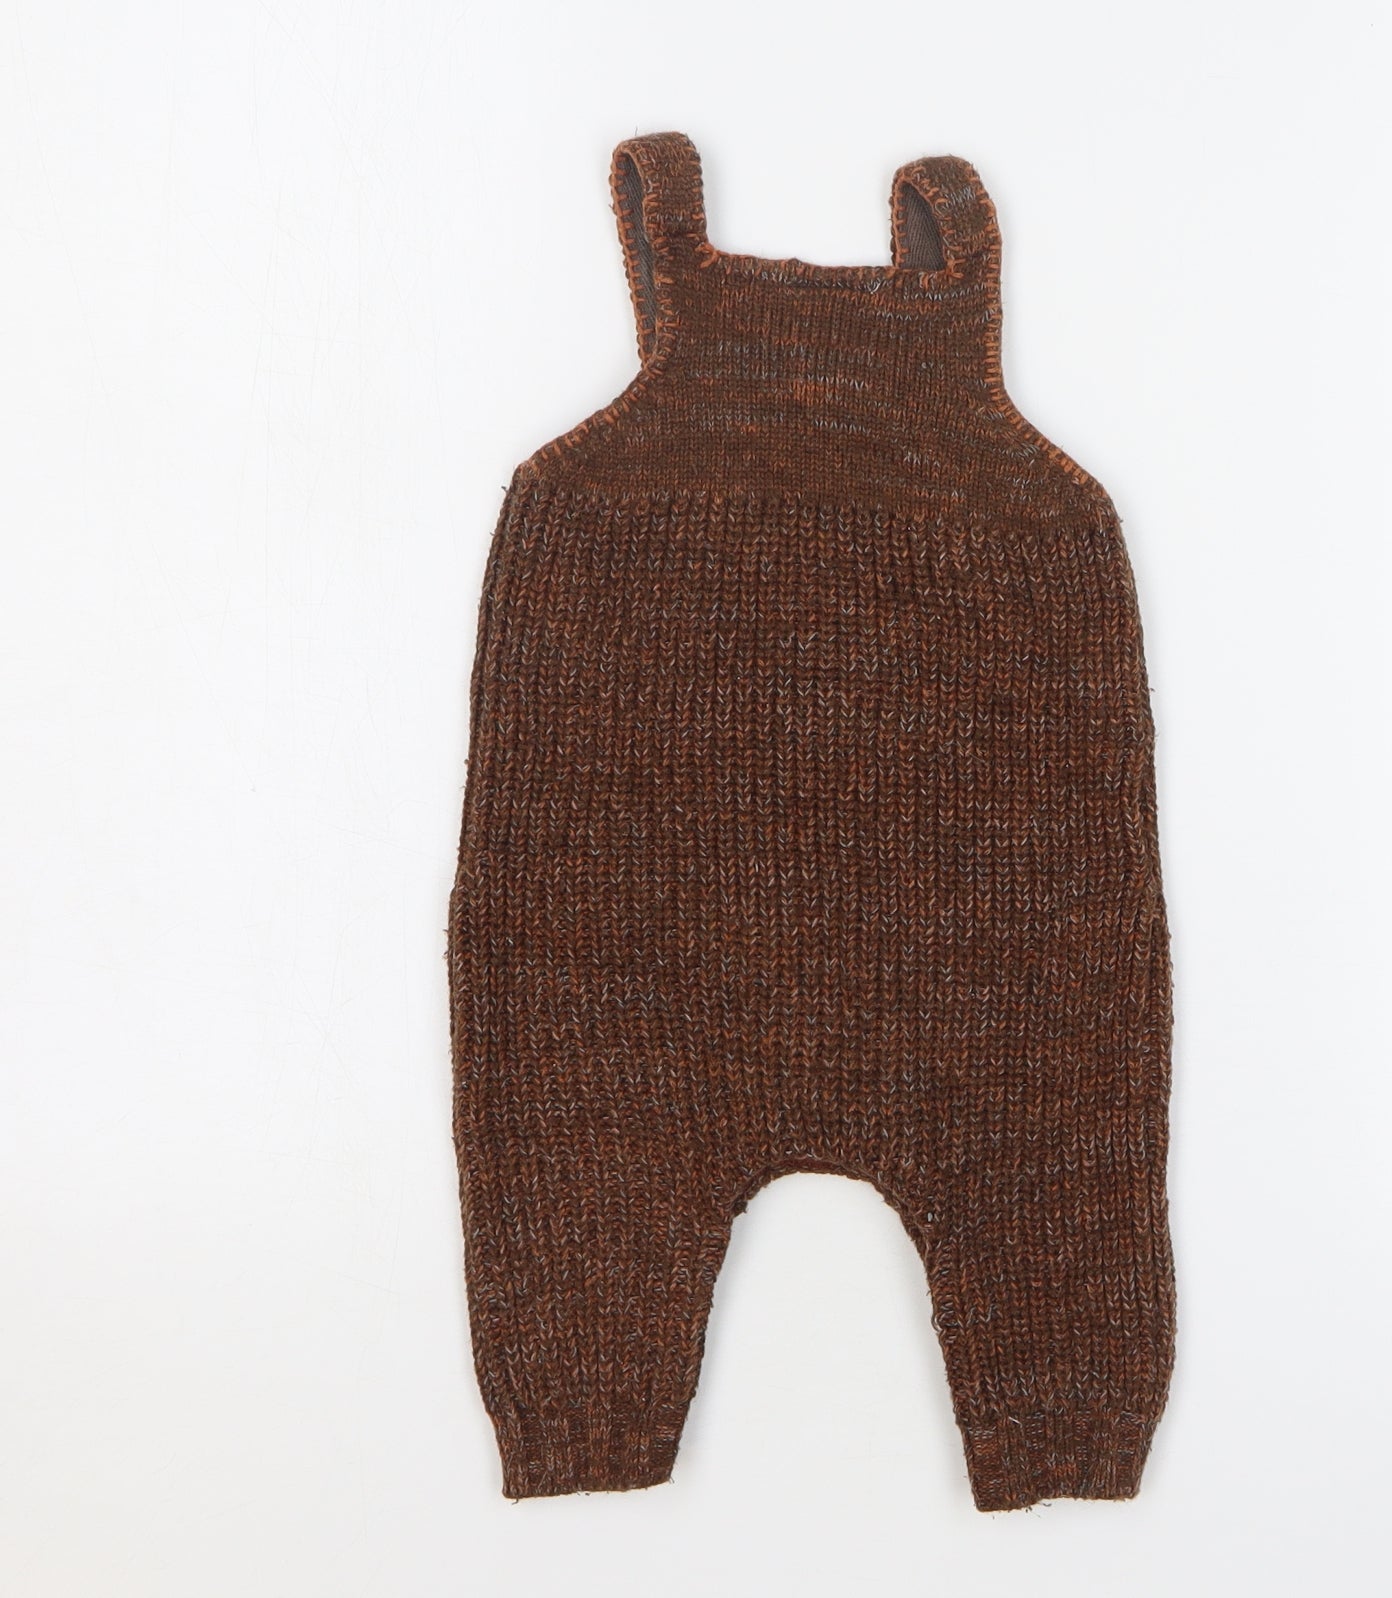 NEXT Boys Brown Acrylic Dungaree One-Piece Size 3-6 Months Snap